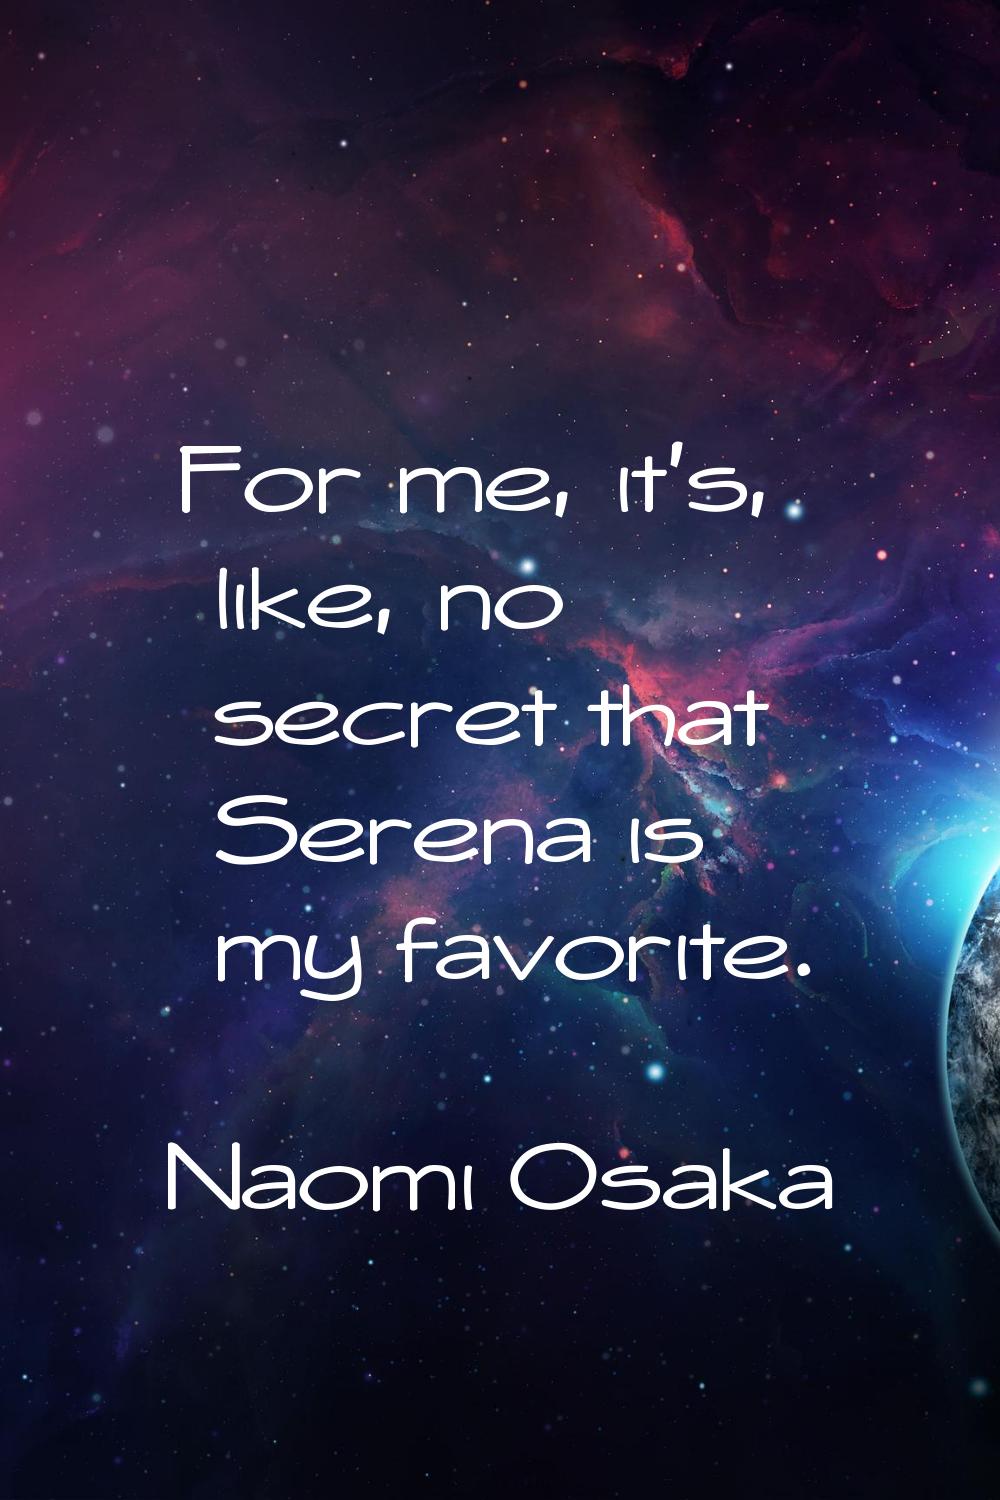 For me, it's, like, no secret that Serena is my favorite.